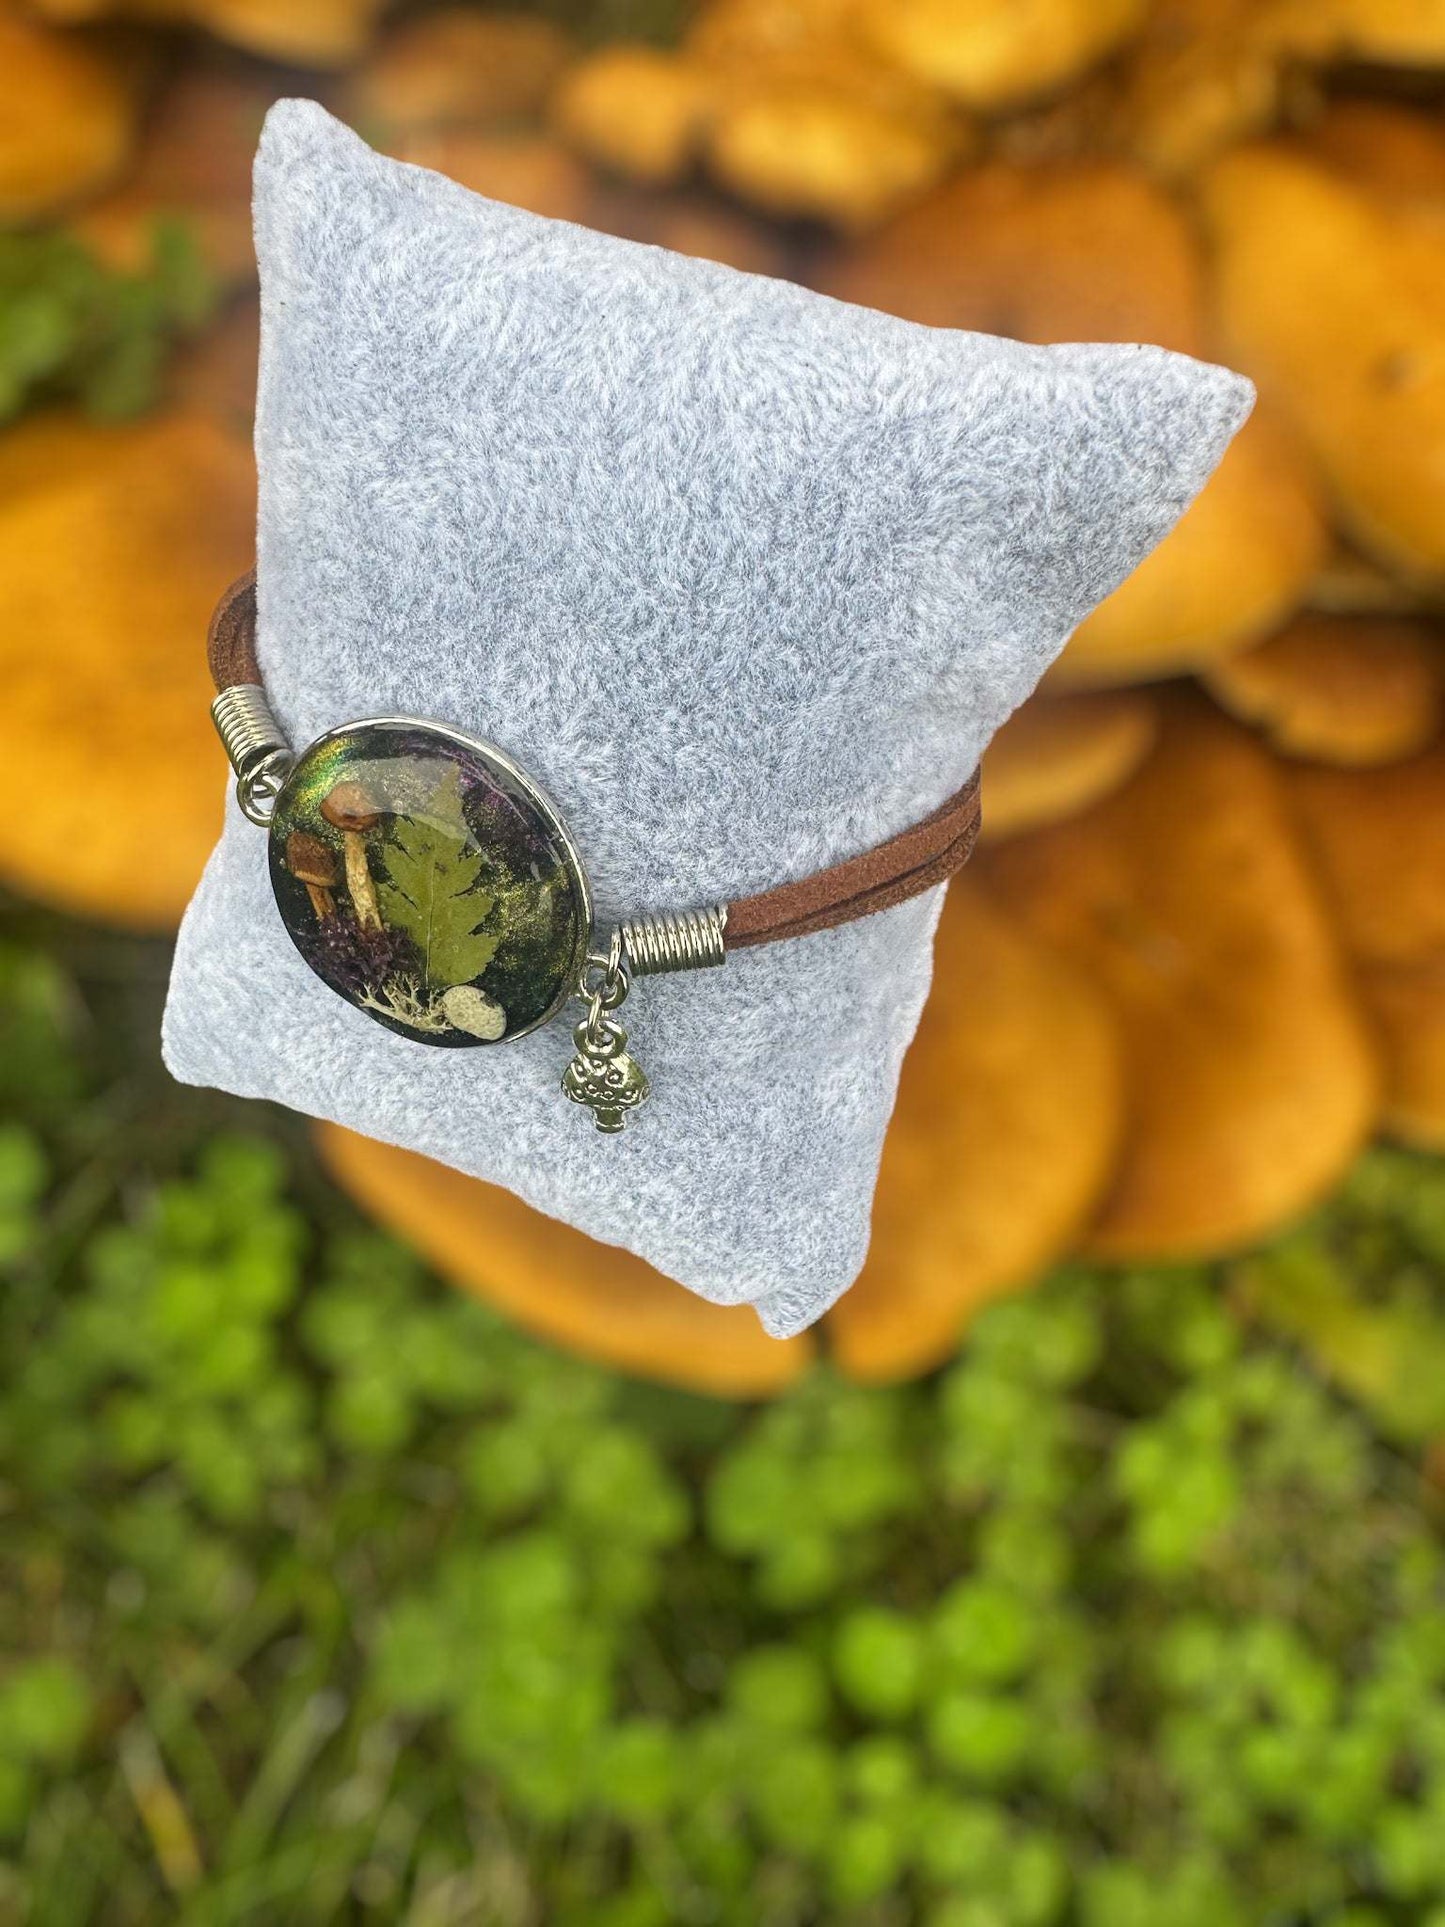 Handmade Resin Bracelet with Dried Botanical Accents & Flowers